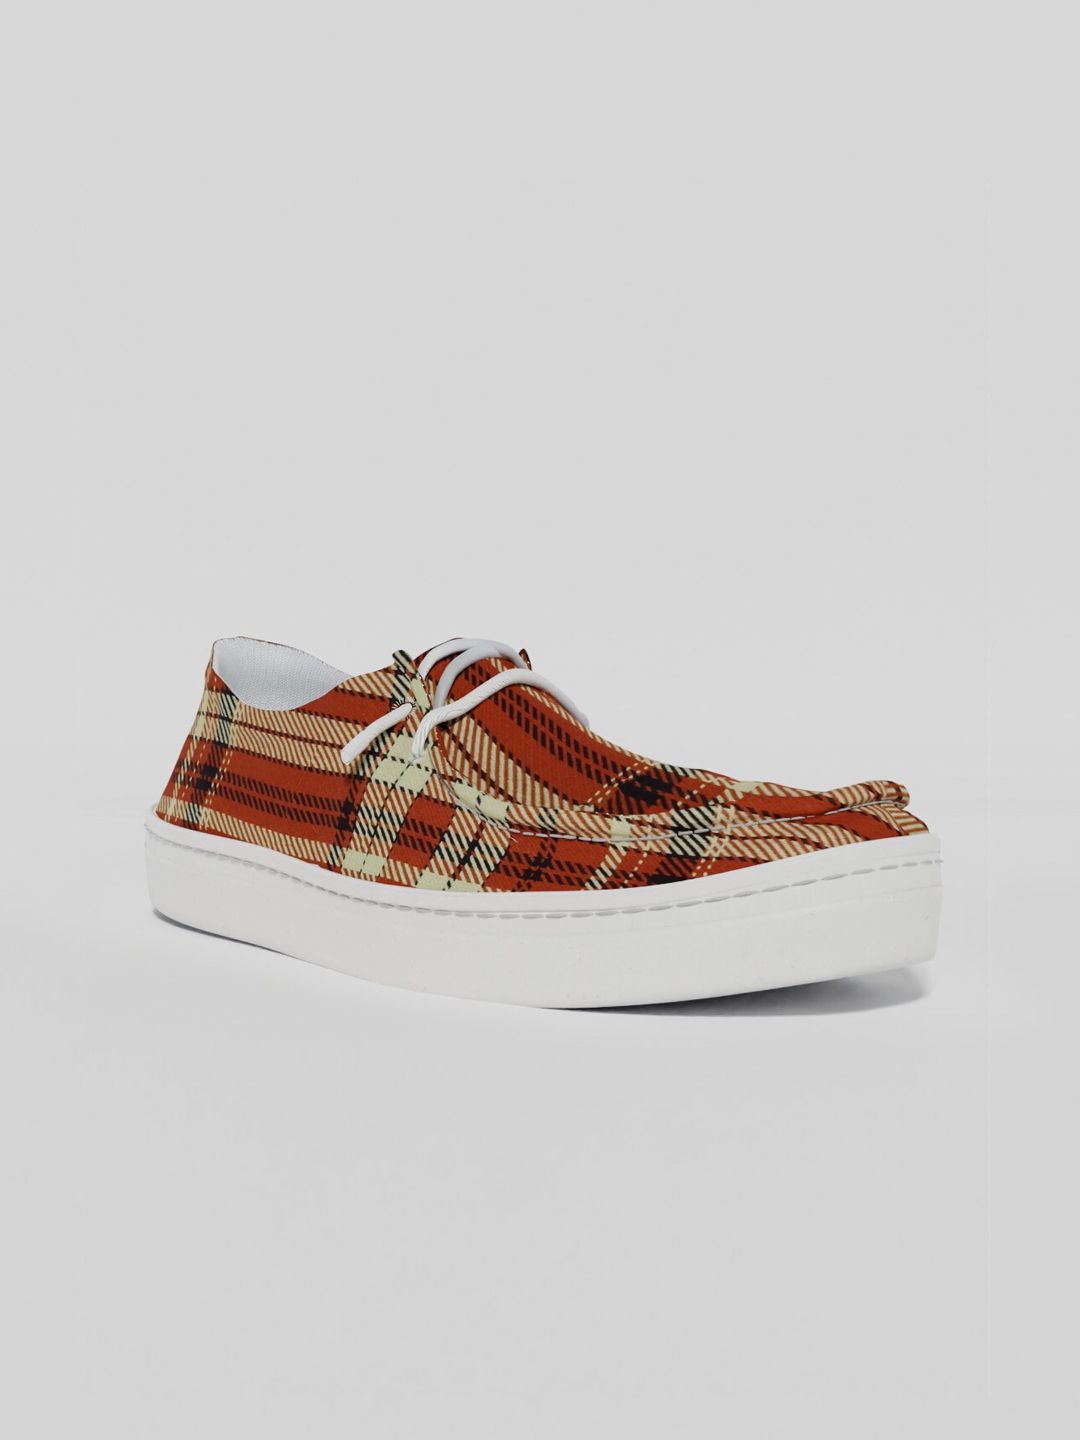 LOKAIT The Sneakers Company Women Rust Printed Slip-On Sneakers Price in India